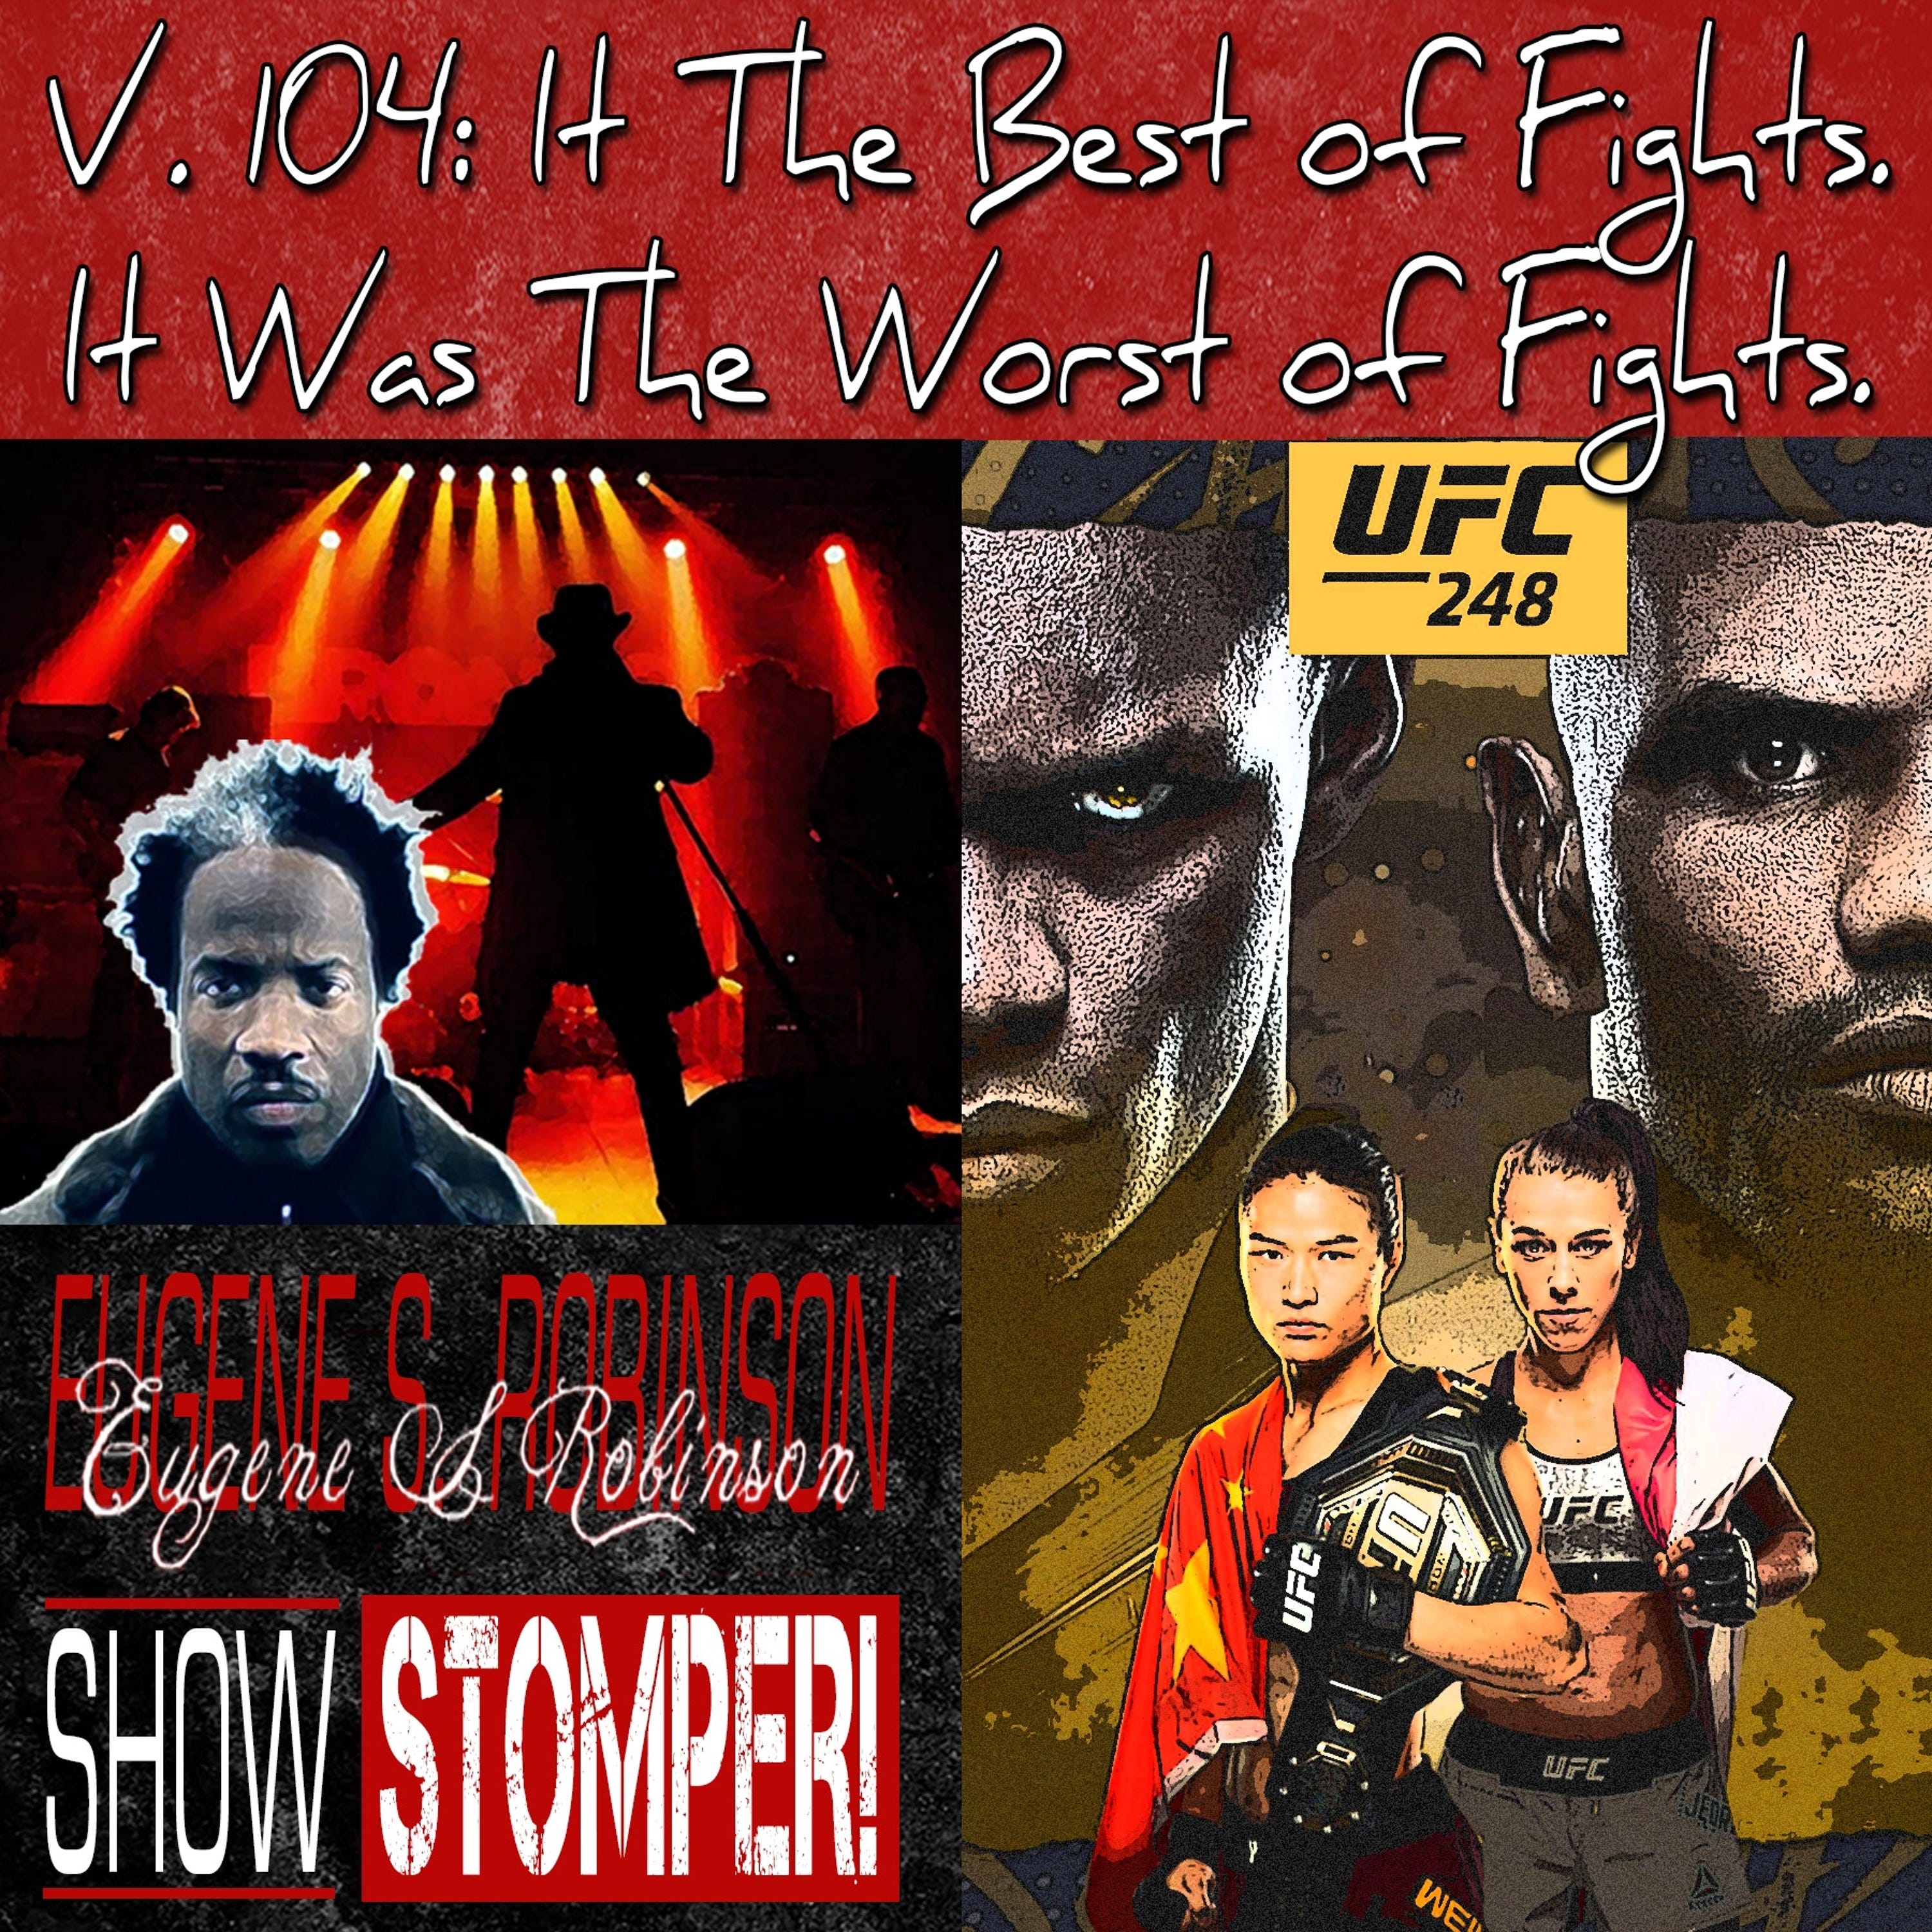 V.104 It Was The Best Of Fights. It Was The Worst Of Fights On The Eugene S. Robinson Show Stomper!